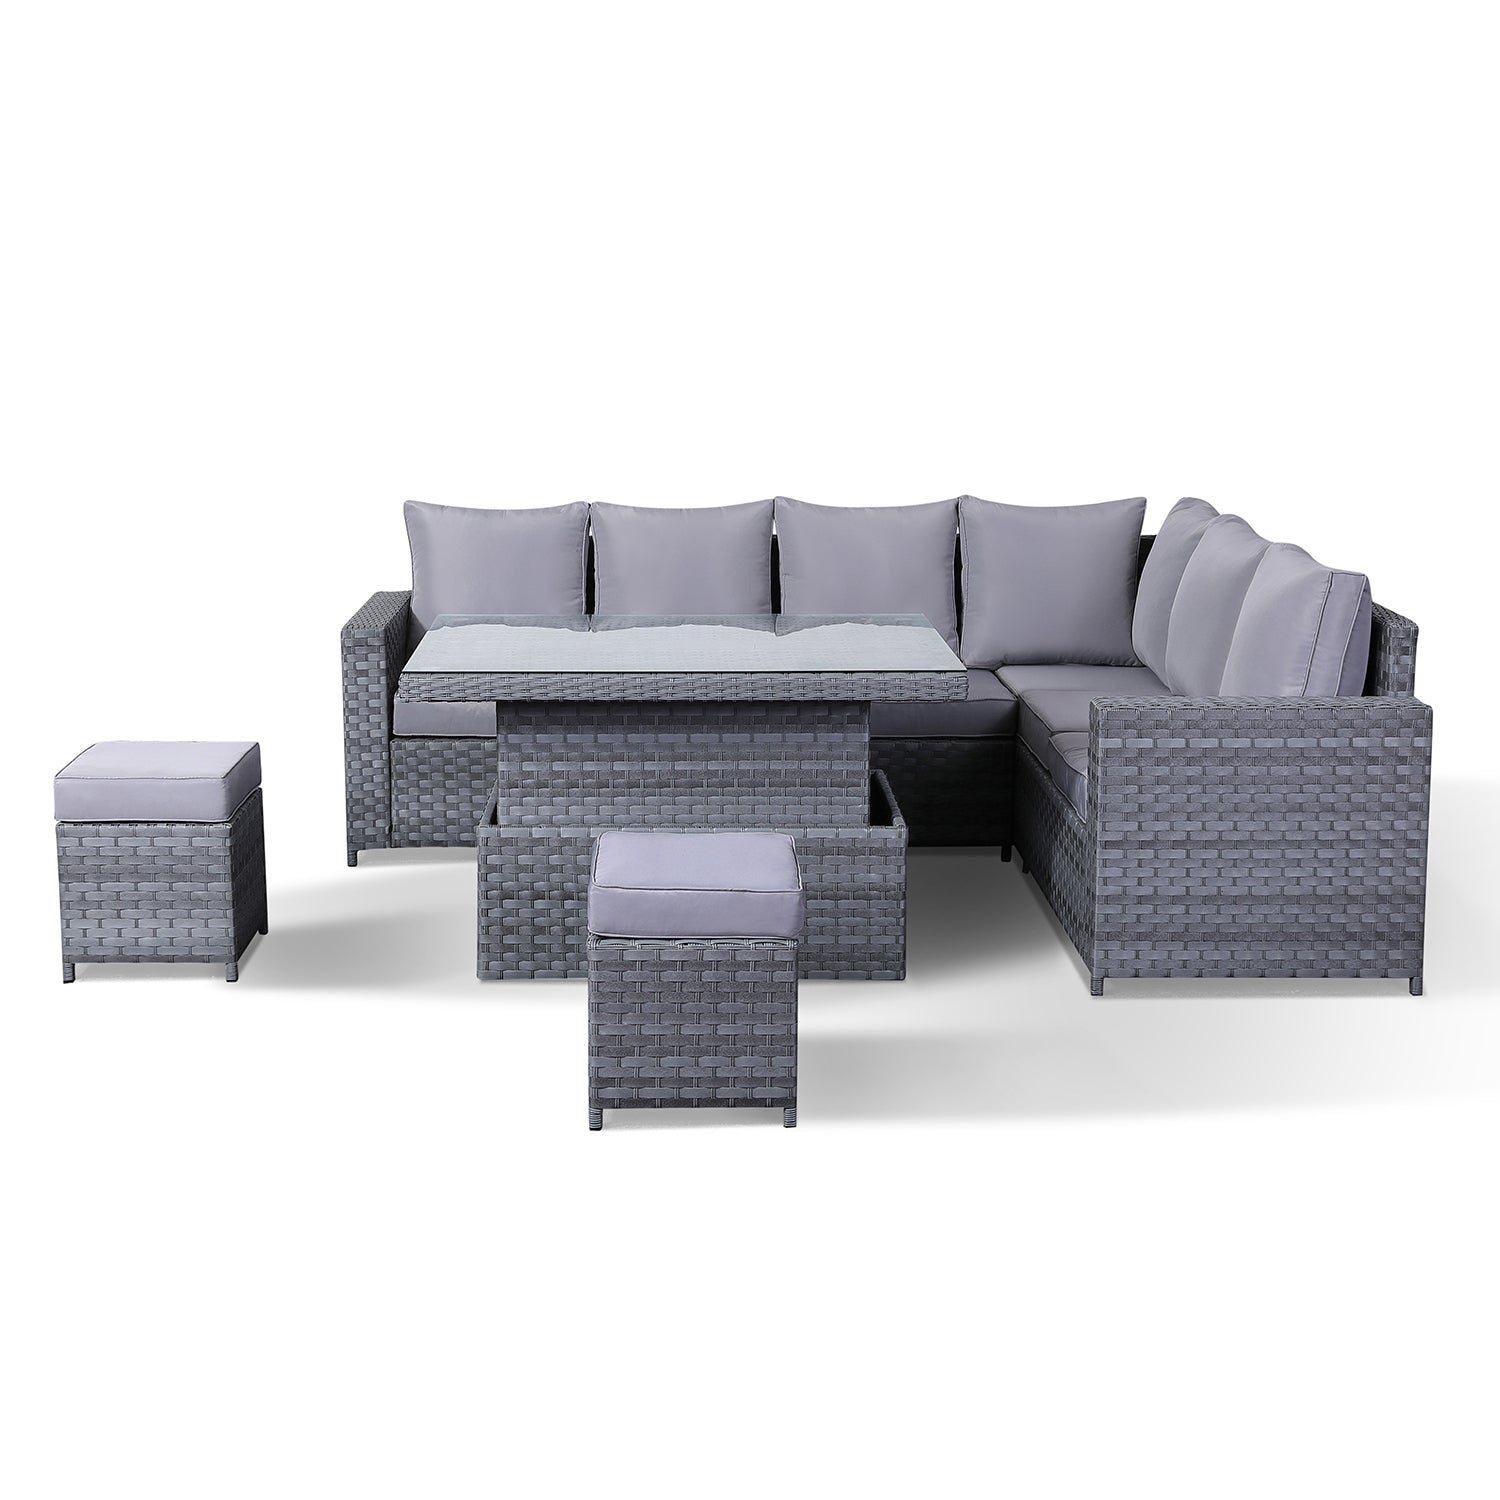 Aster Range High Back RHF Large Dining Corner Sofa Set with Lift & Rise Table In Grey